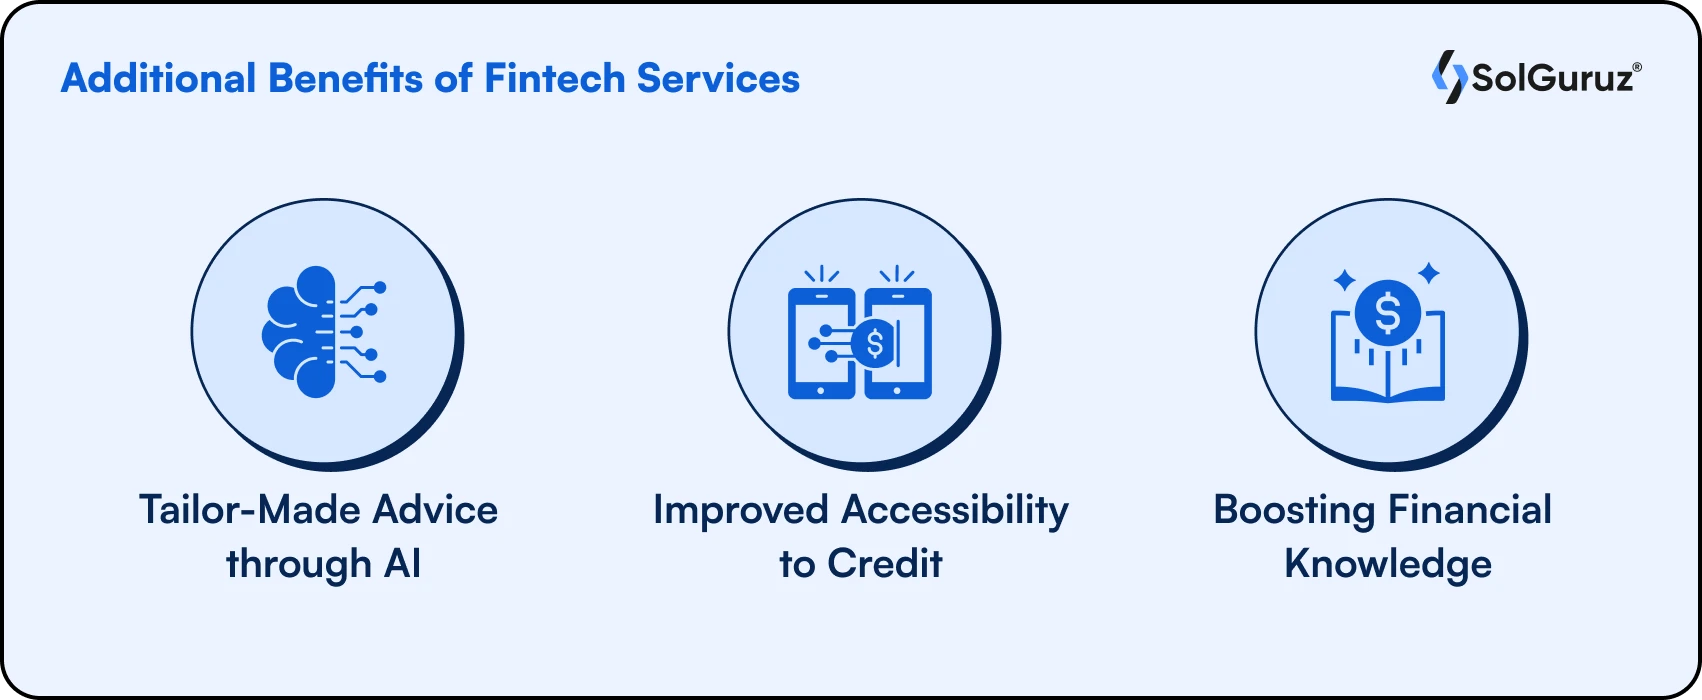 Additional Benefits of Fintech Services